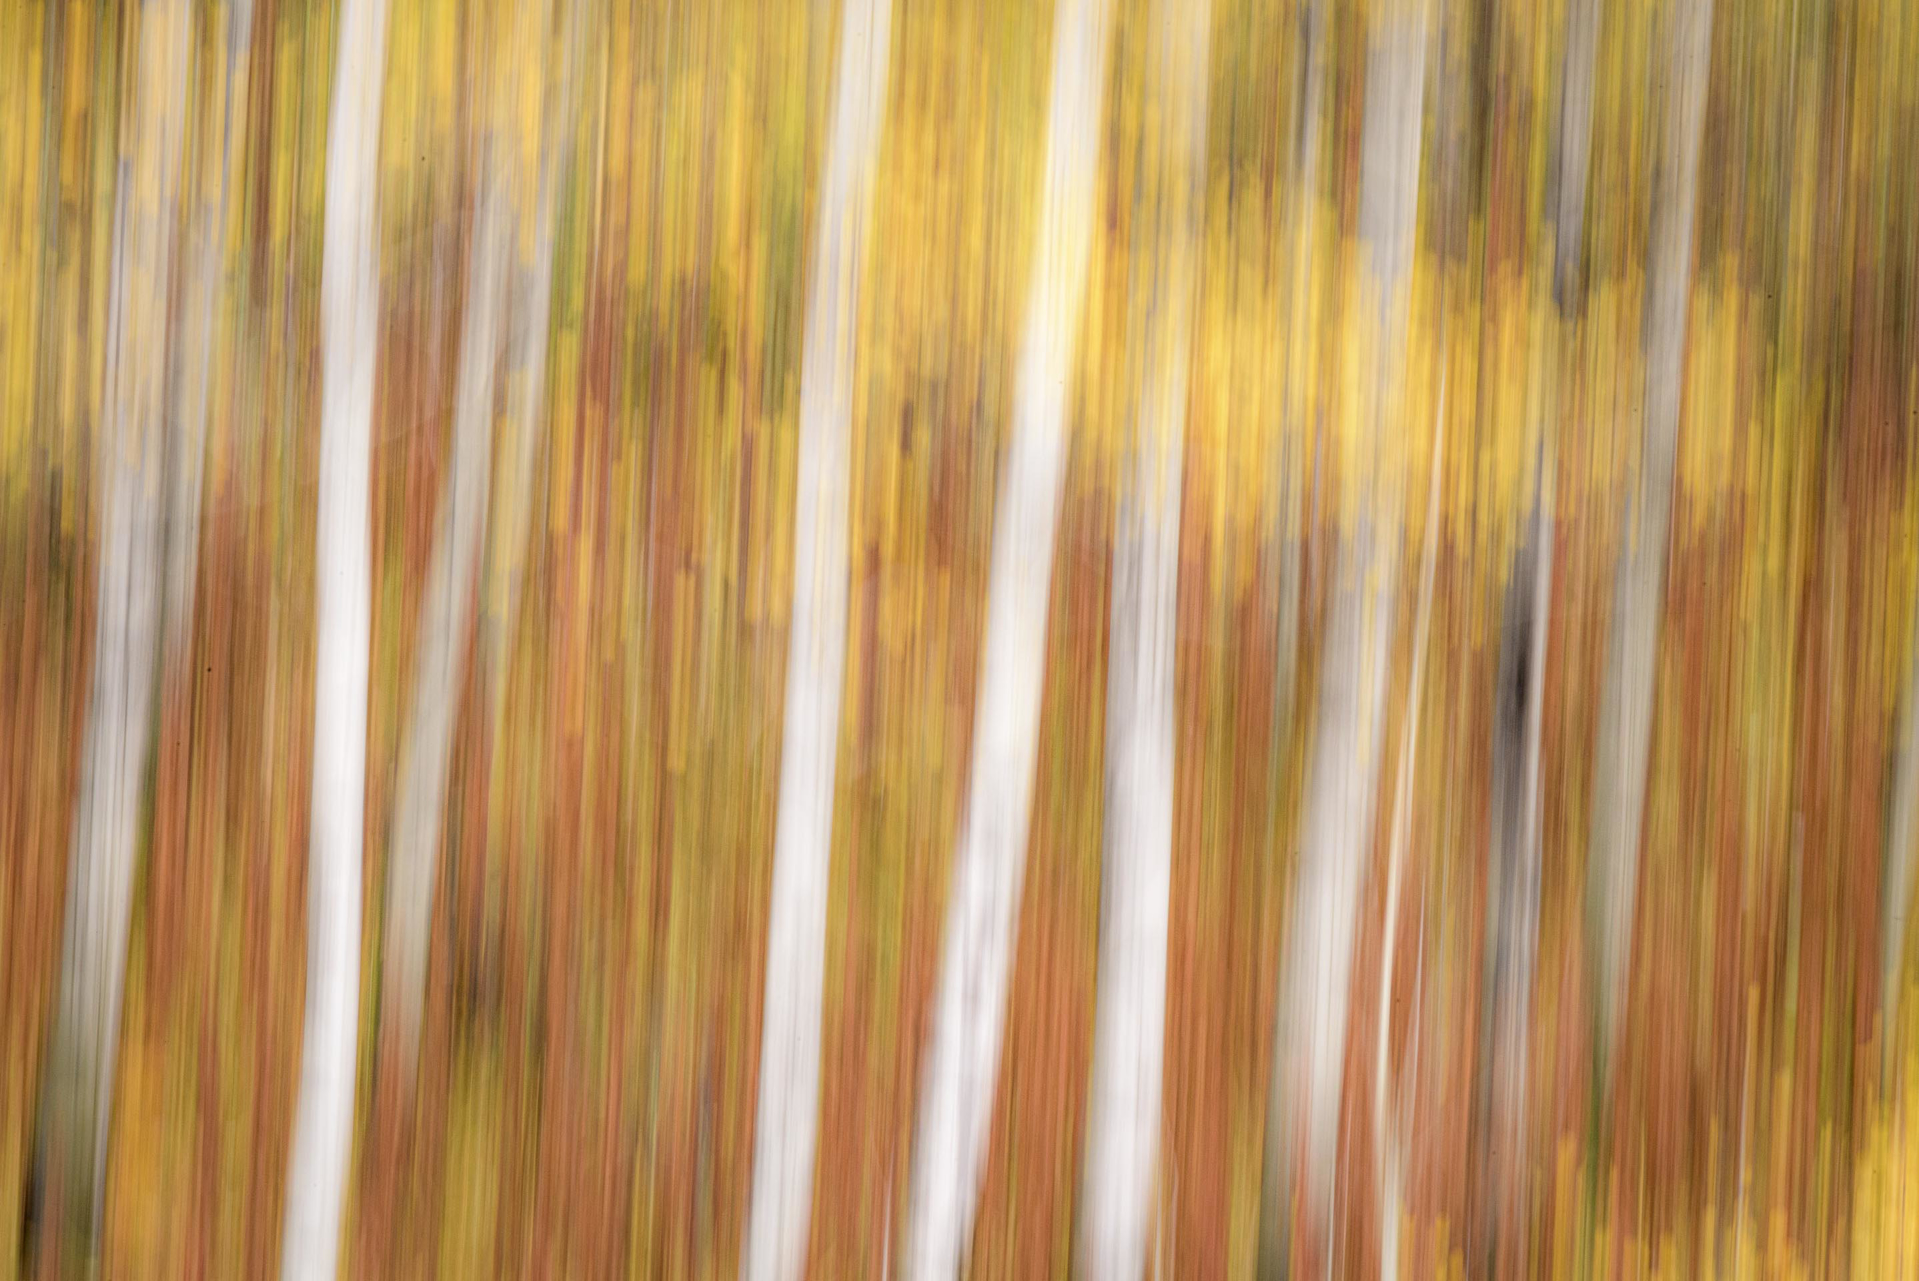 Abstract Fine Art Photography Printed On Metal Featuring Fall Orange And Yellow Leaves On White Aspen Trees, Limited Edition By Dwight Vasel